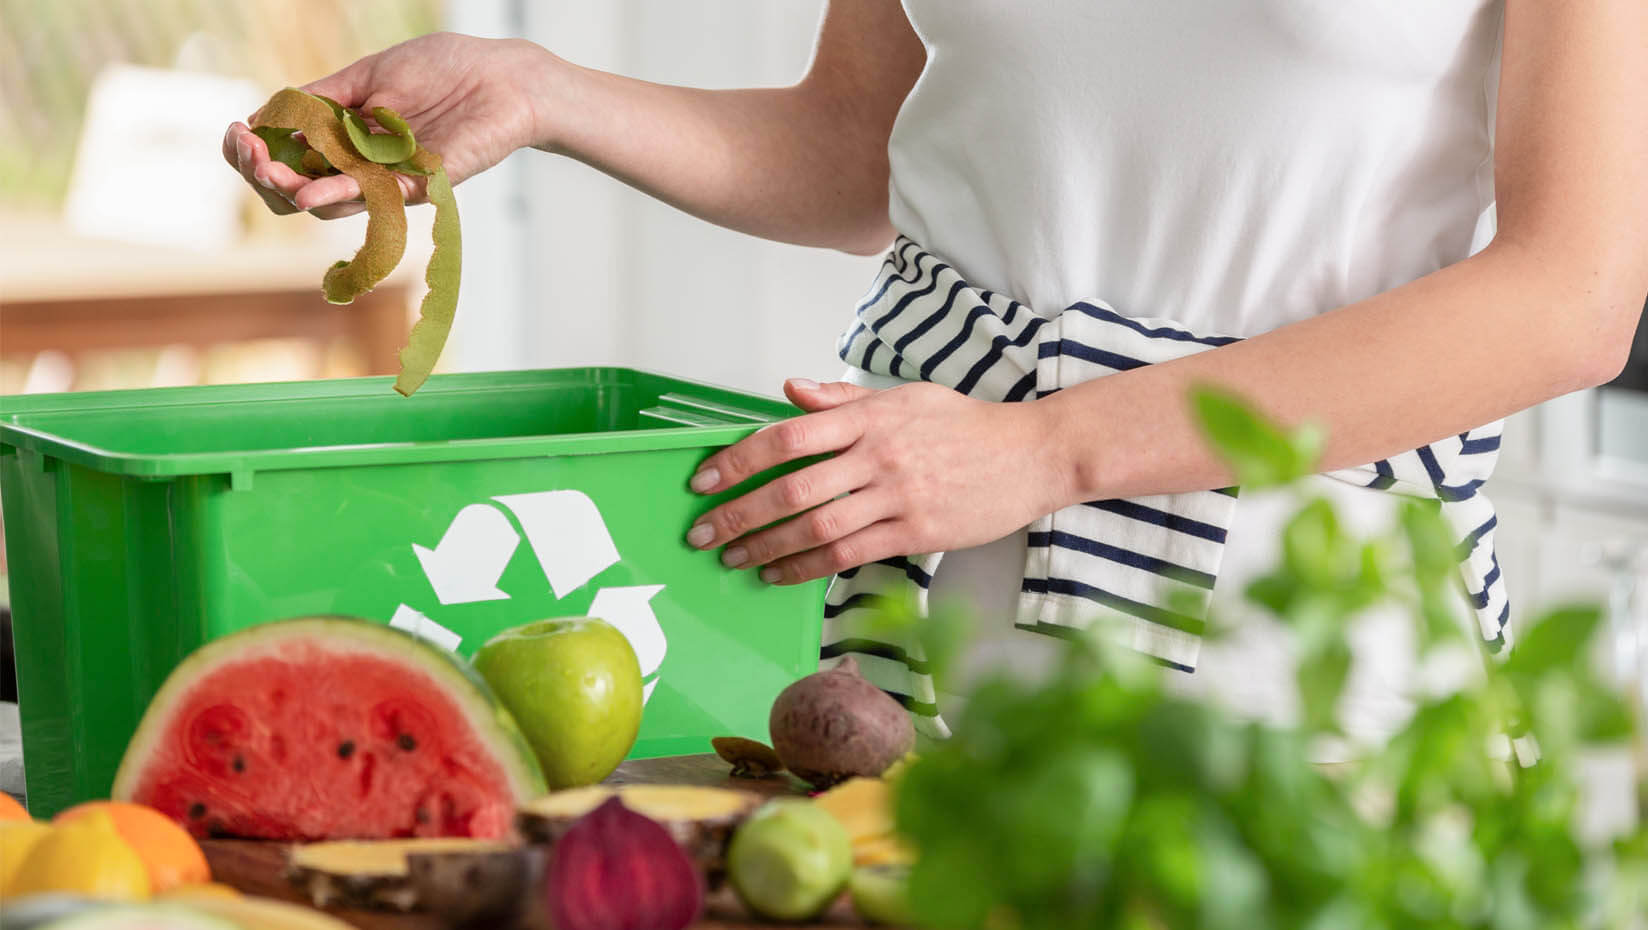 A woman puts food into a recycling container